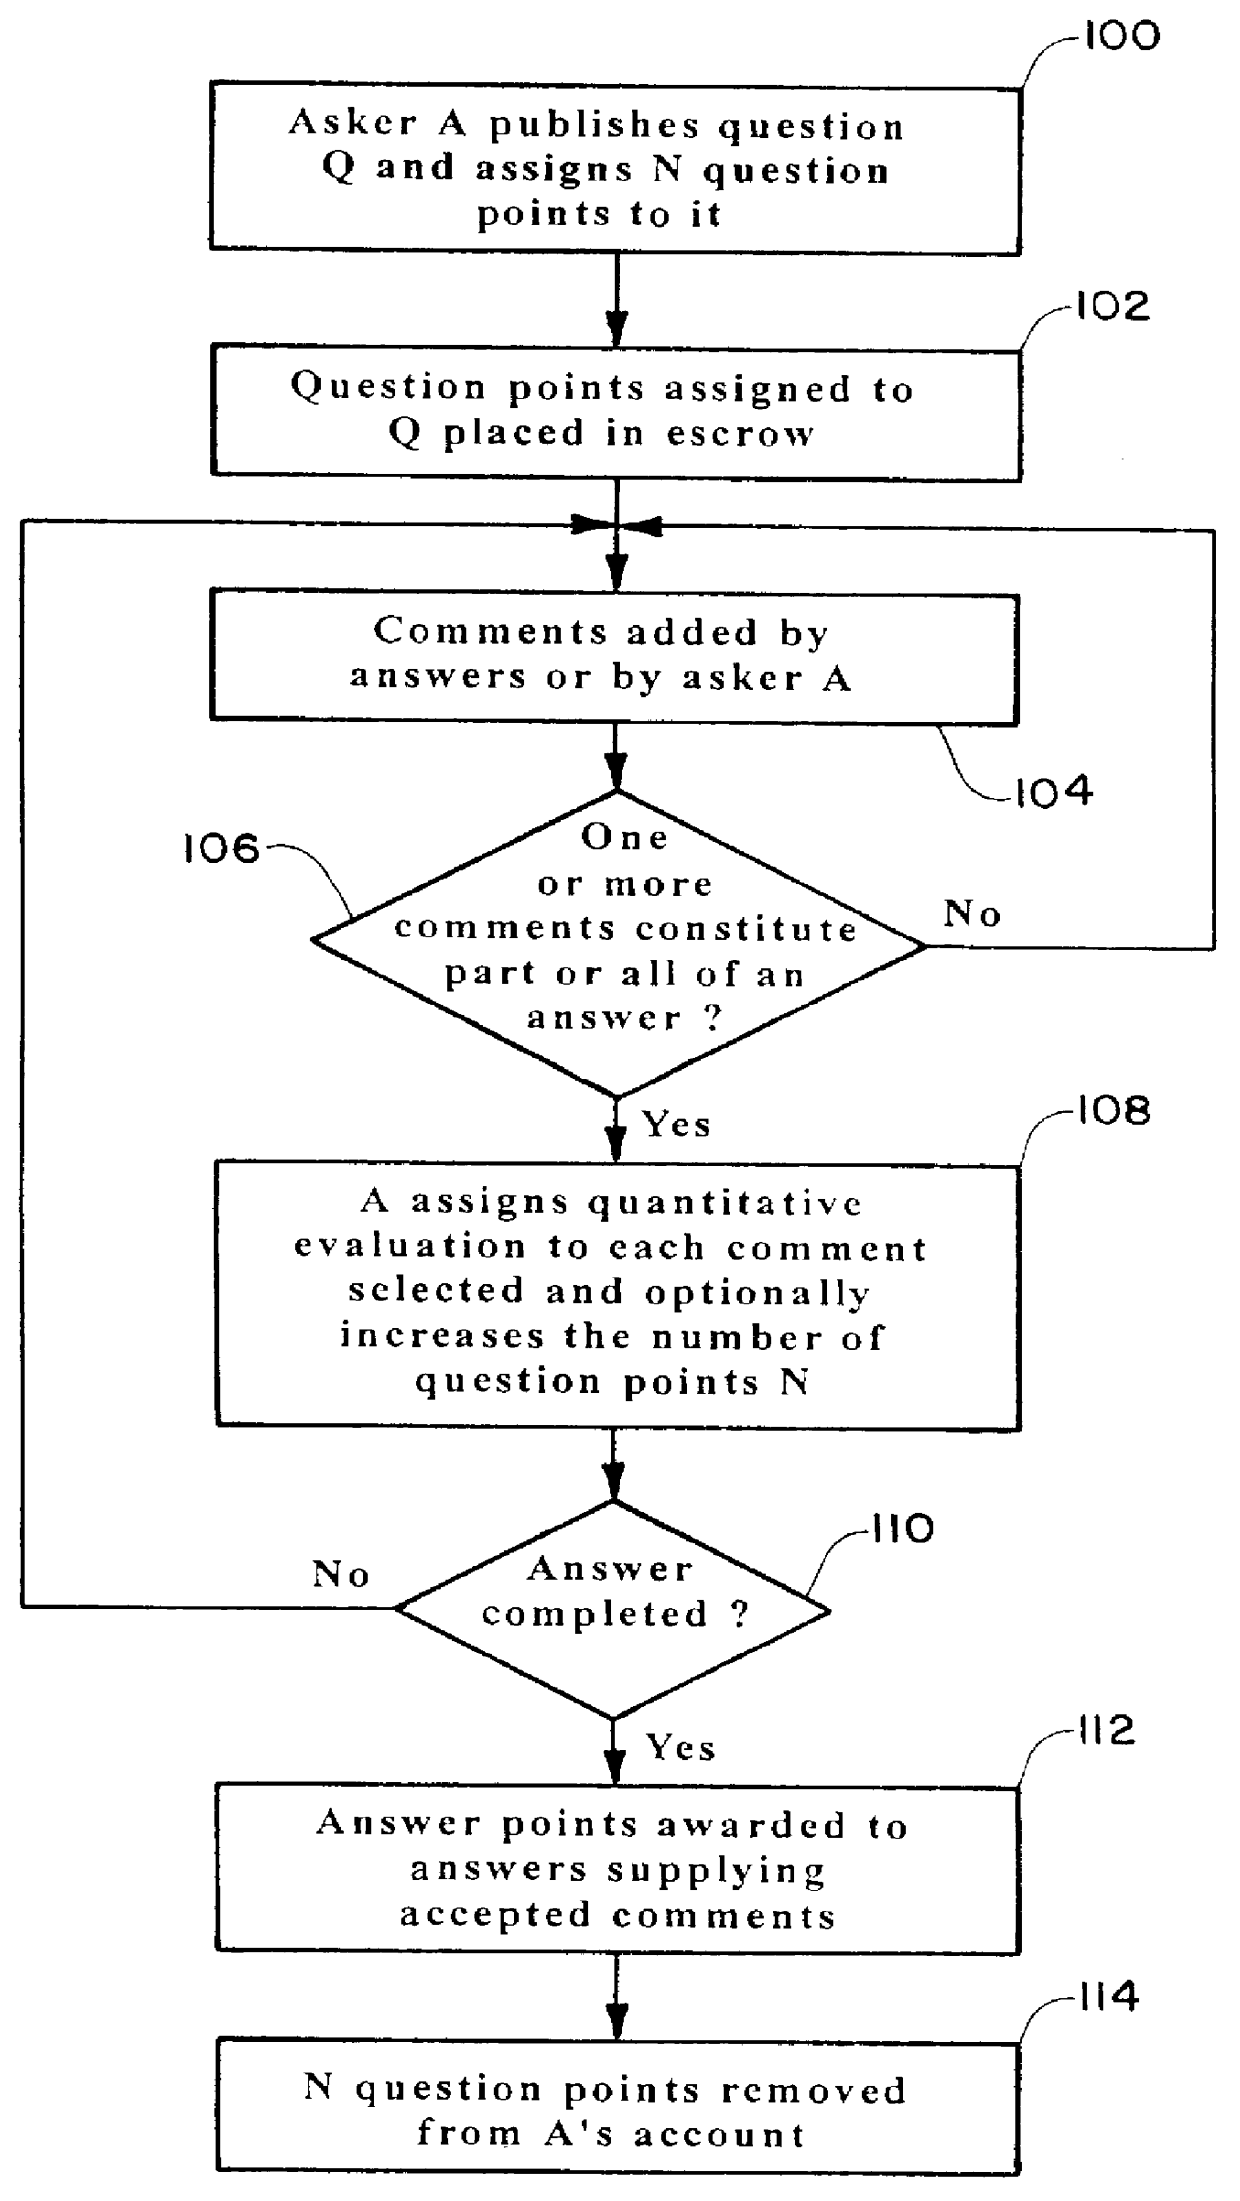 Question and answer system using computer networks